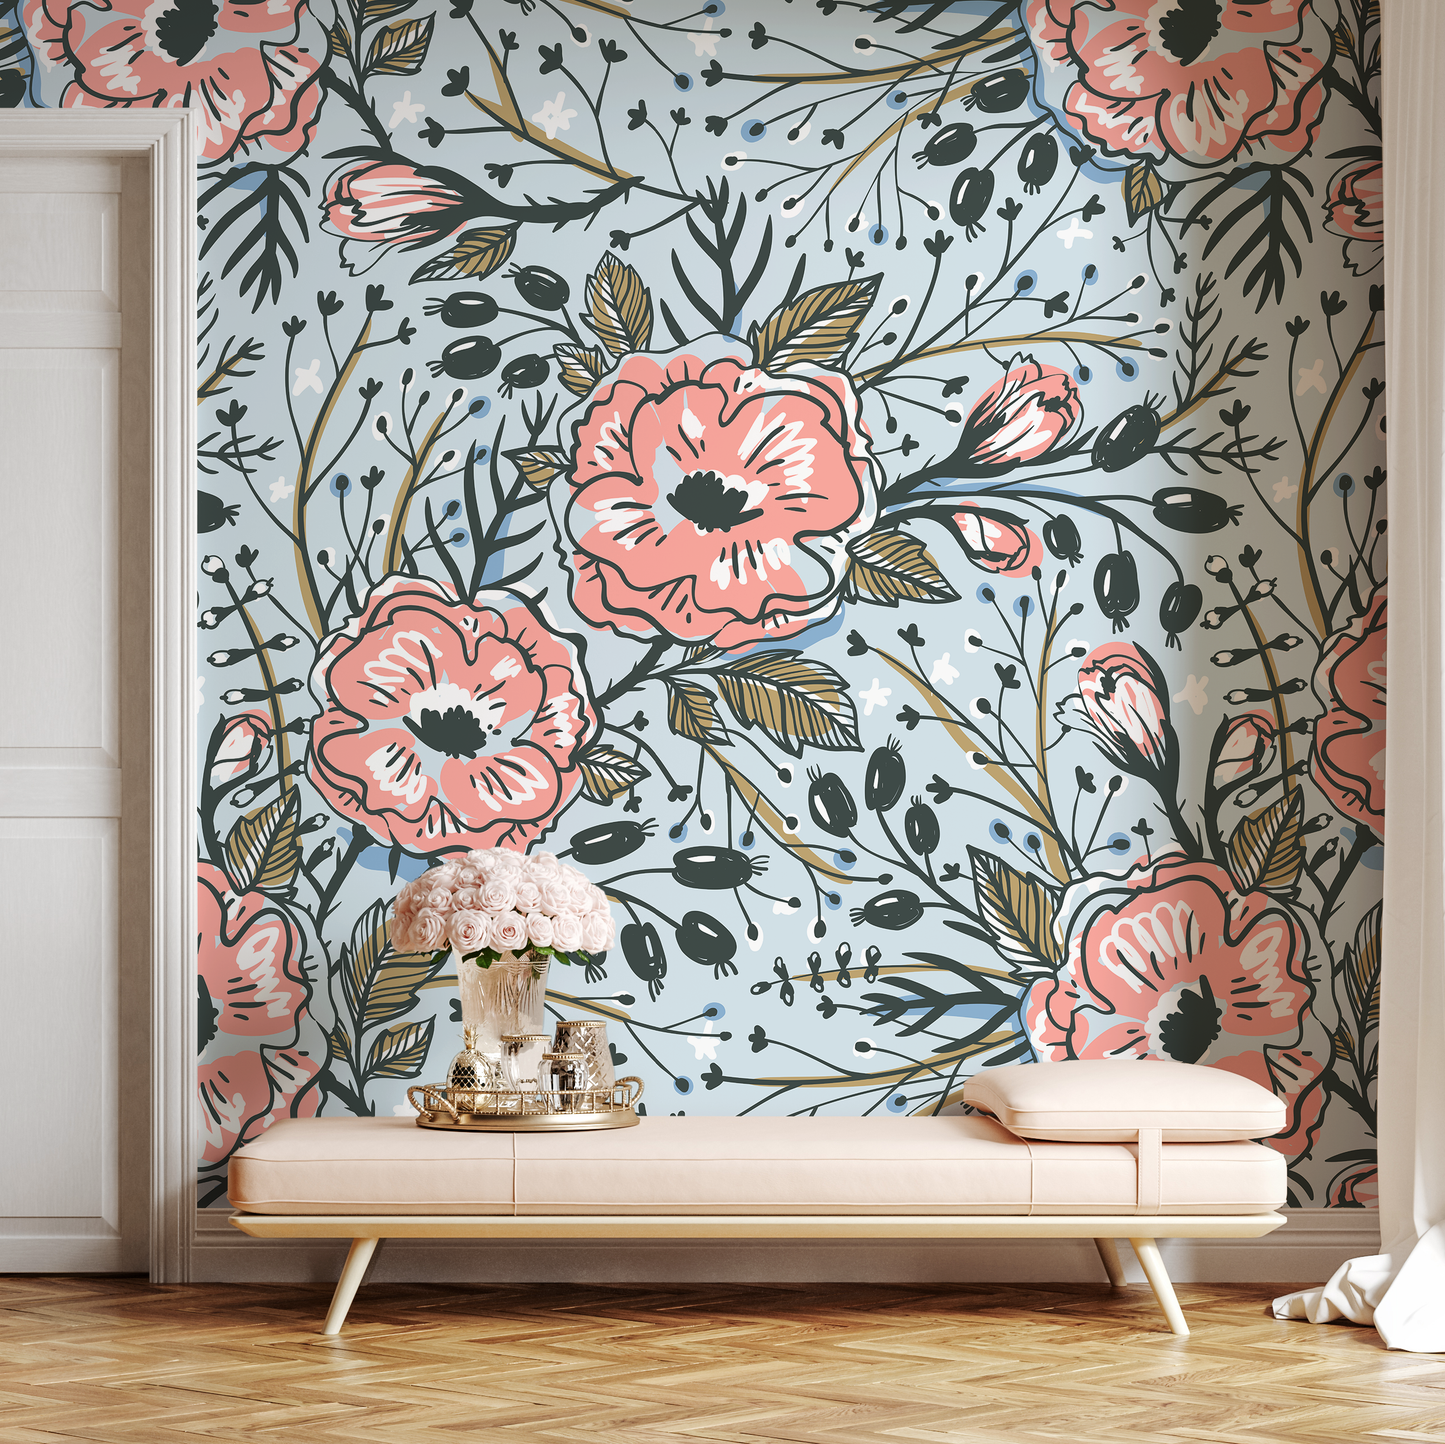 Removable Wallpaper Peel and Stick Wallpaper Wall Paper Wall Mural - Vintage Floral Wallpaper  - A418